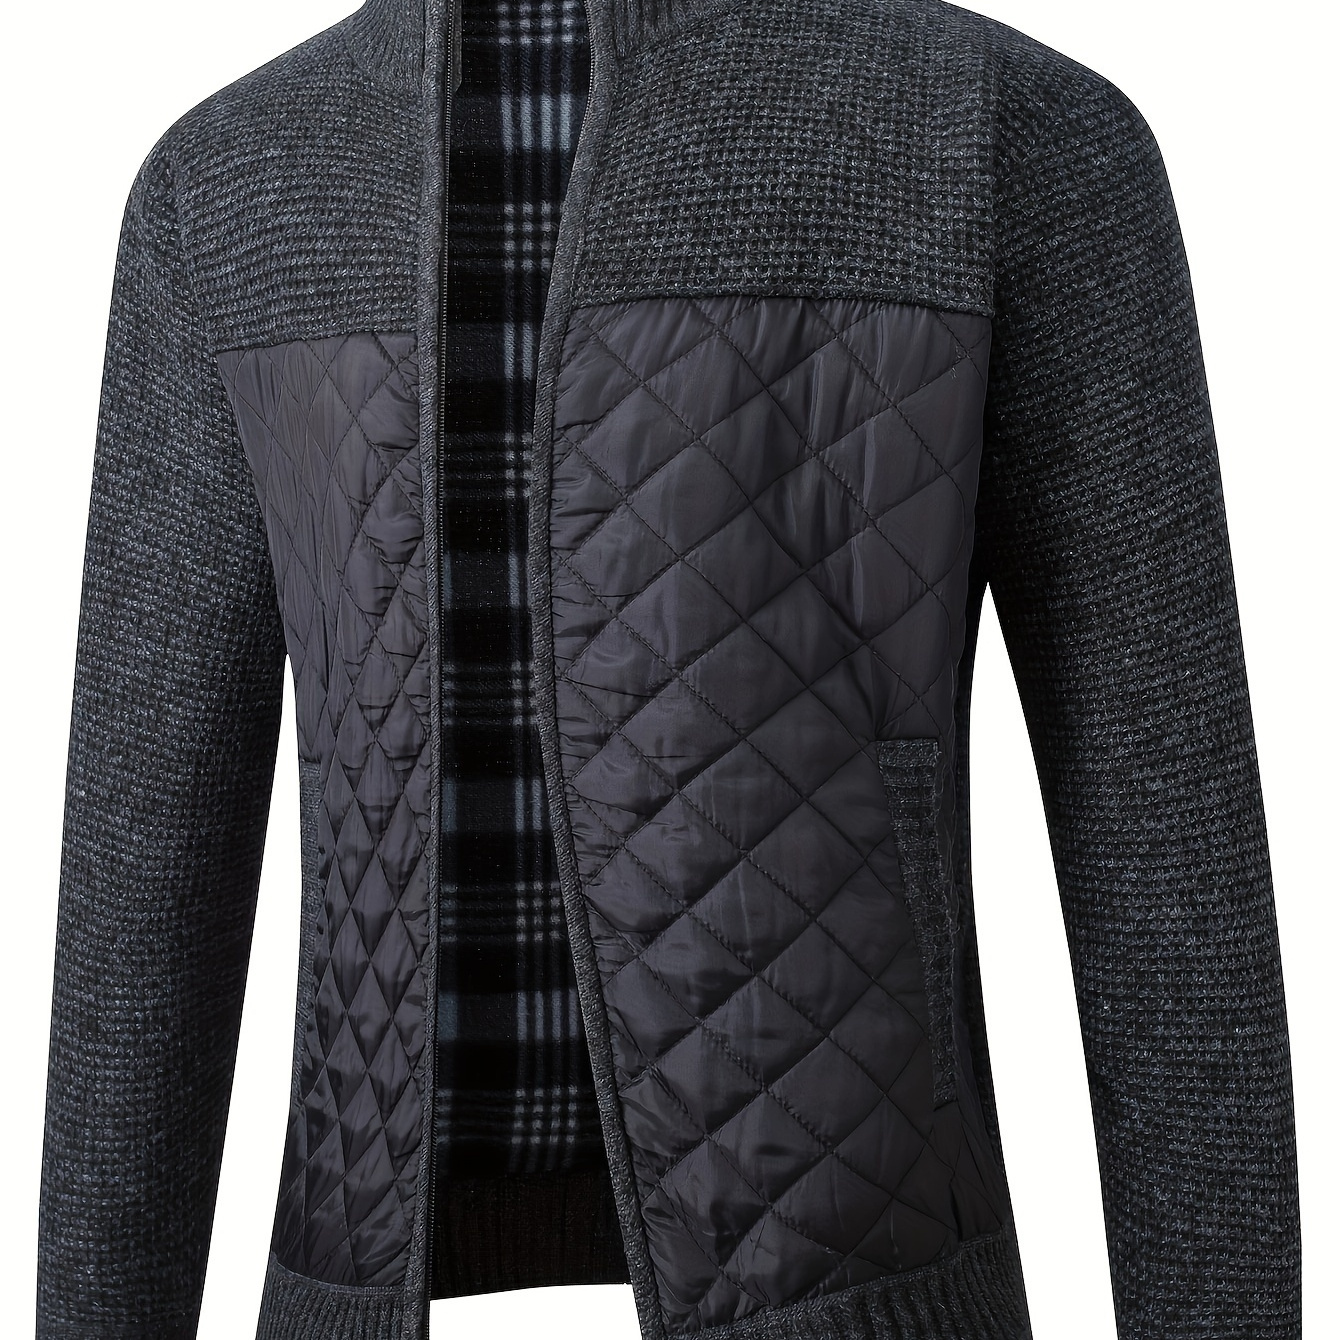 

Men's Casual Stand Collar Knitted Sweater Coat, Chic Warm Long Sleeve Coat